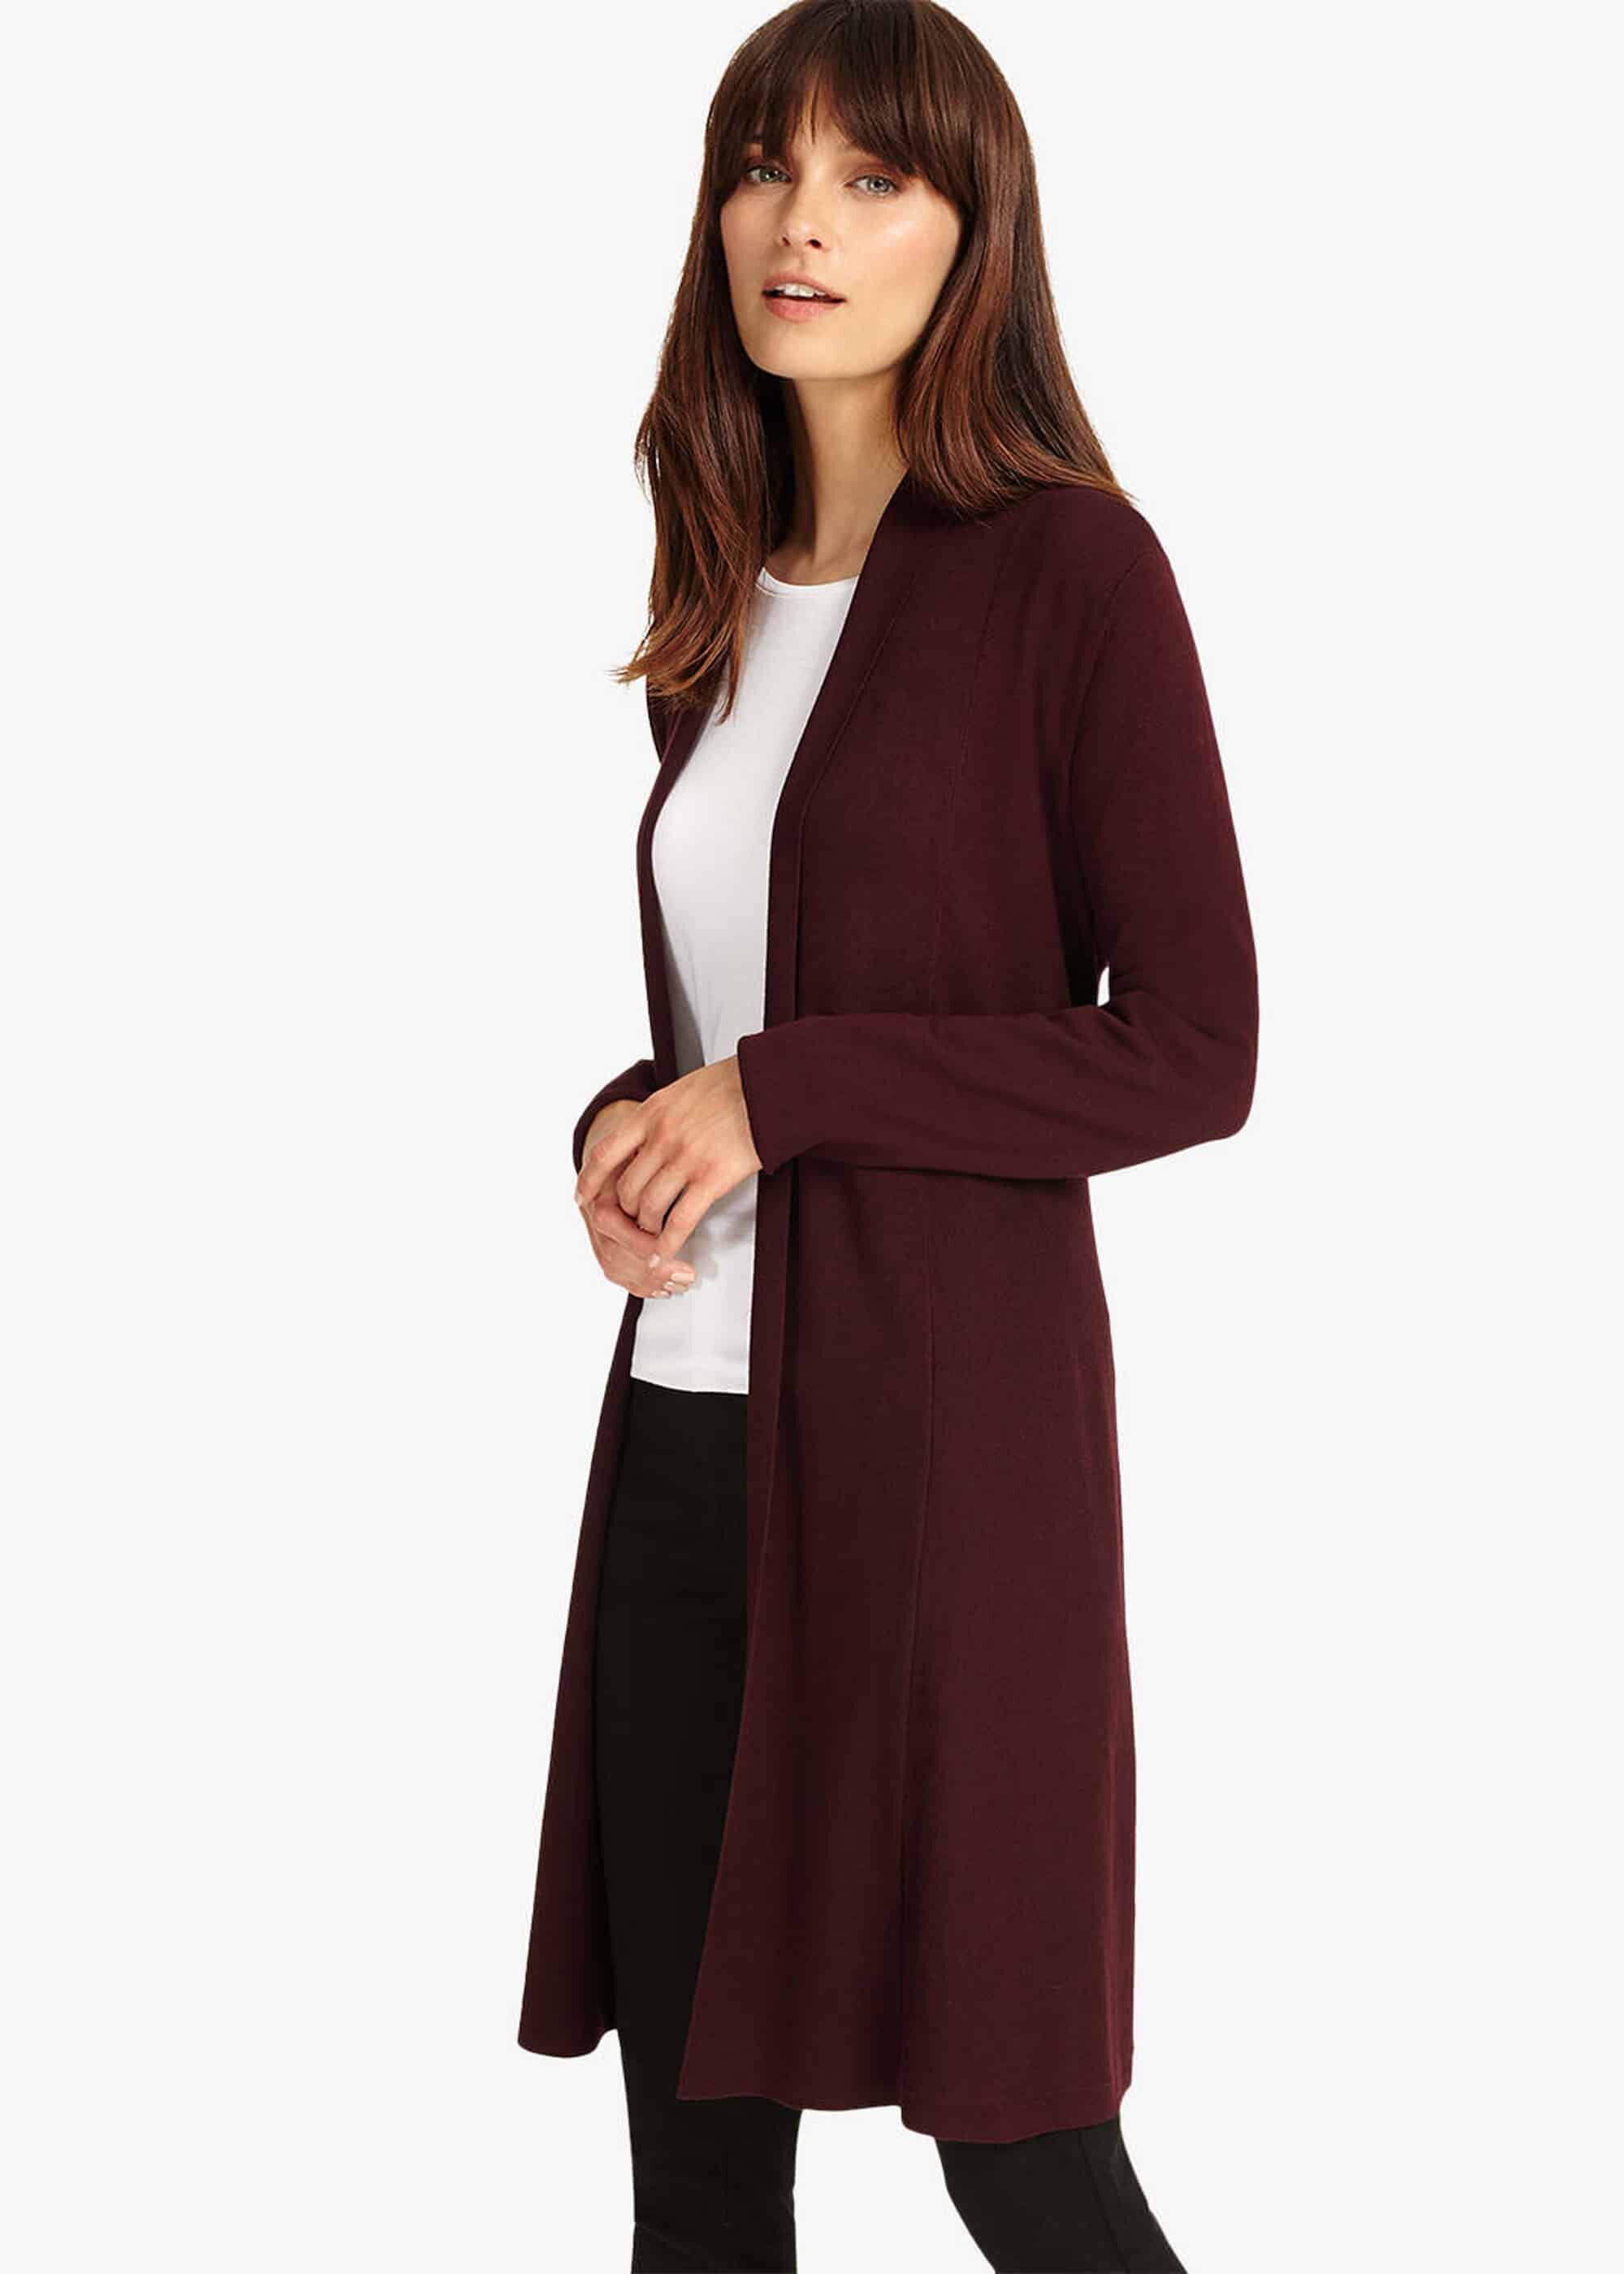 Phase 8 Cardigans Online Sale, UP TO 68% OFF